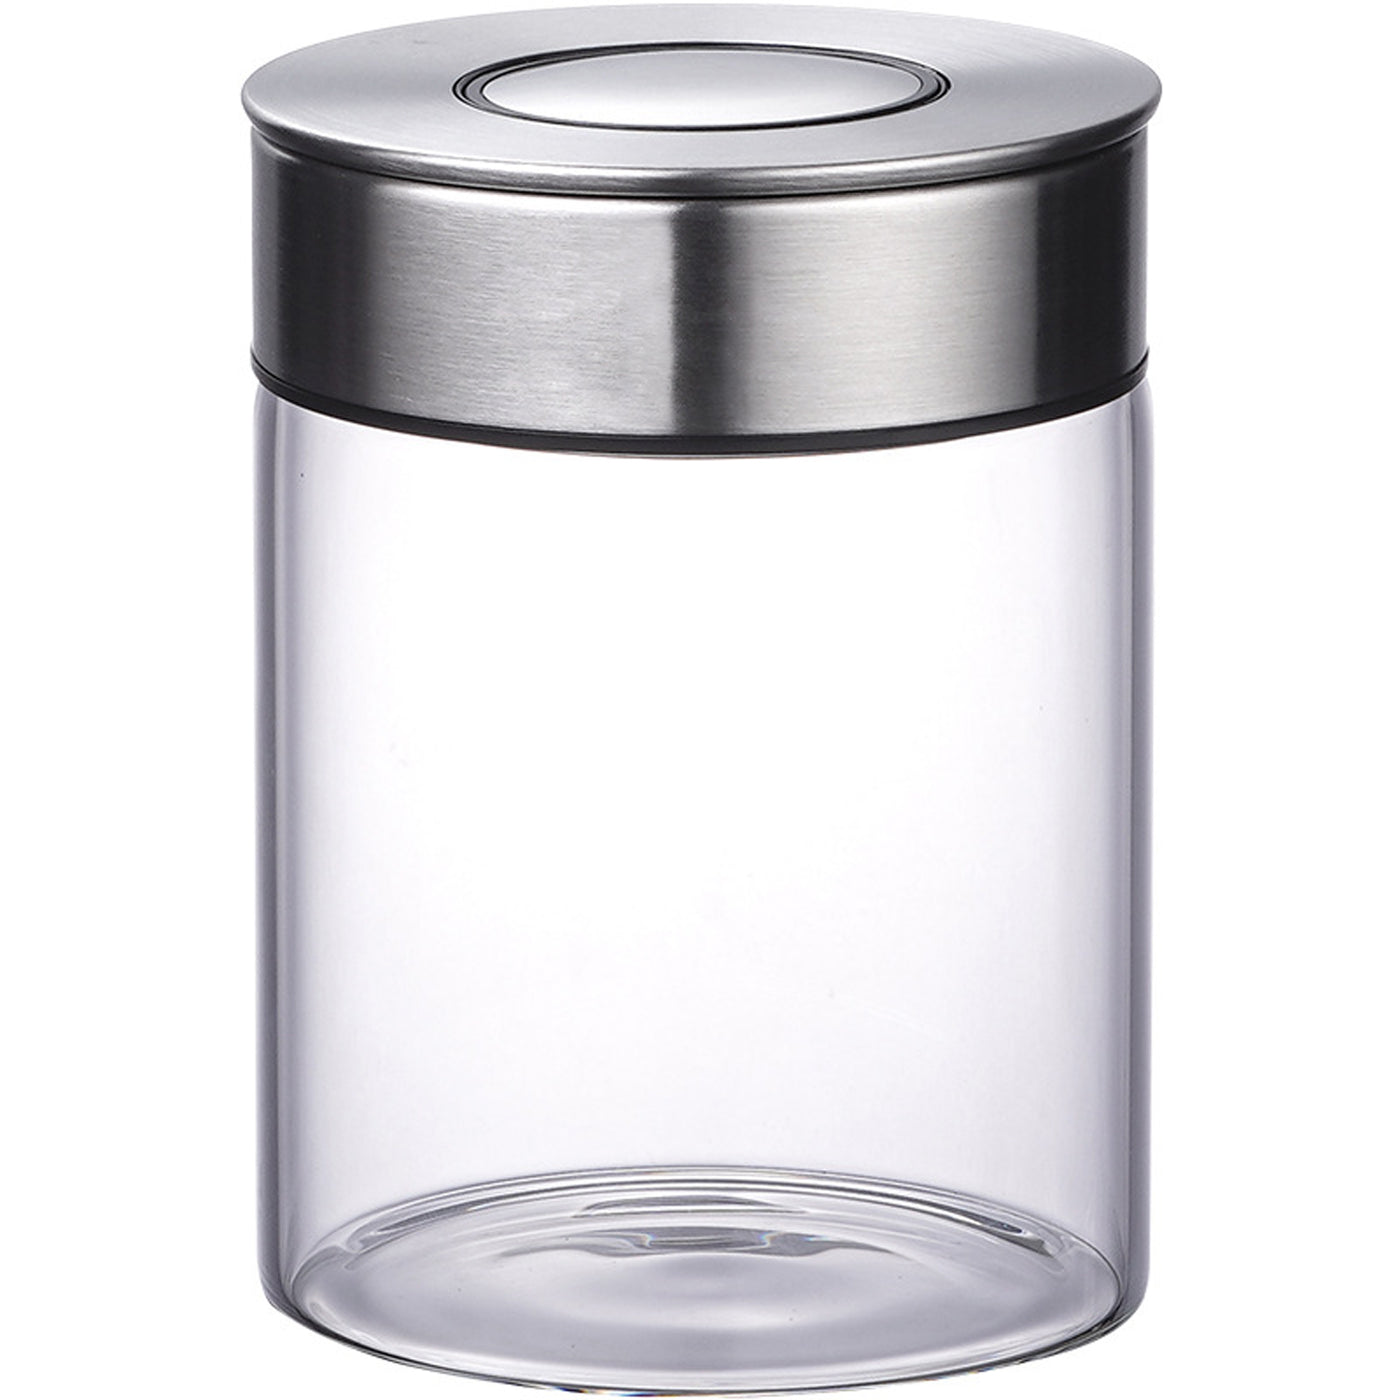 480ml 16oz Clear Borosllicate Glass Storage Canister Jar Container